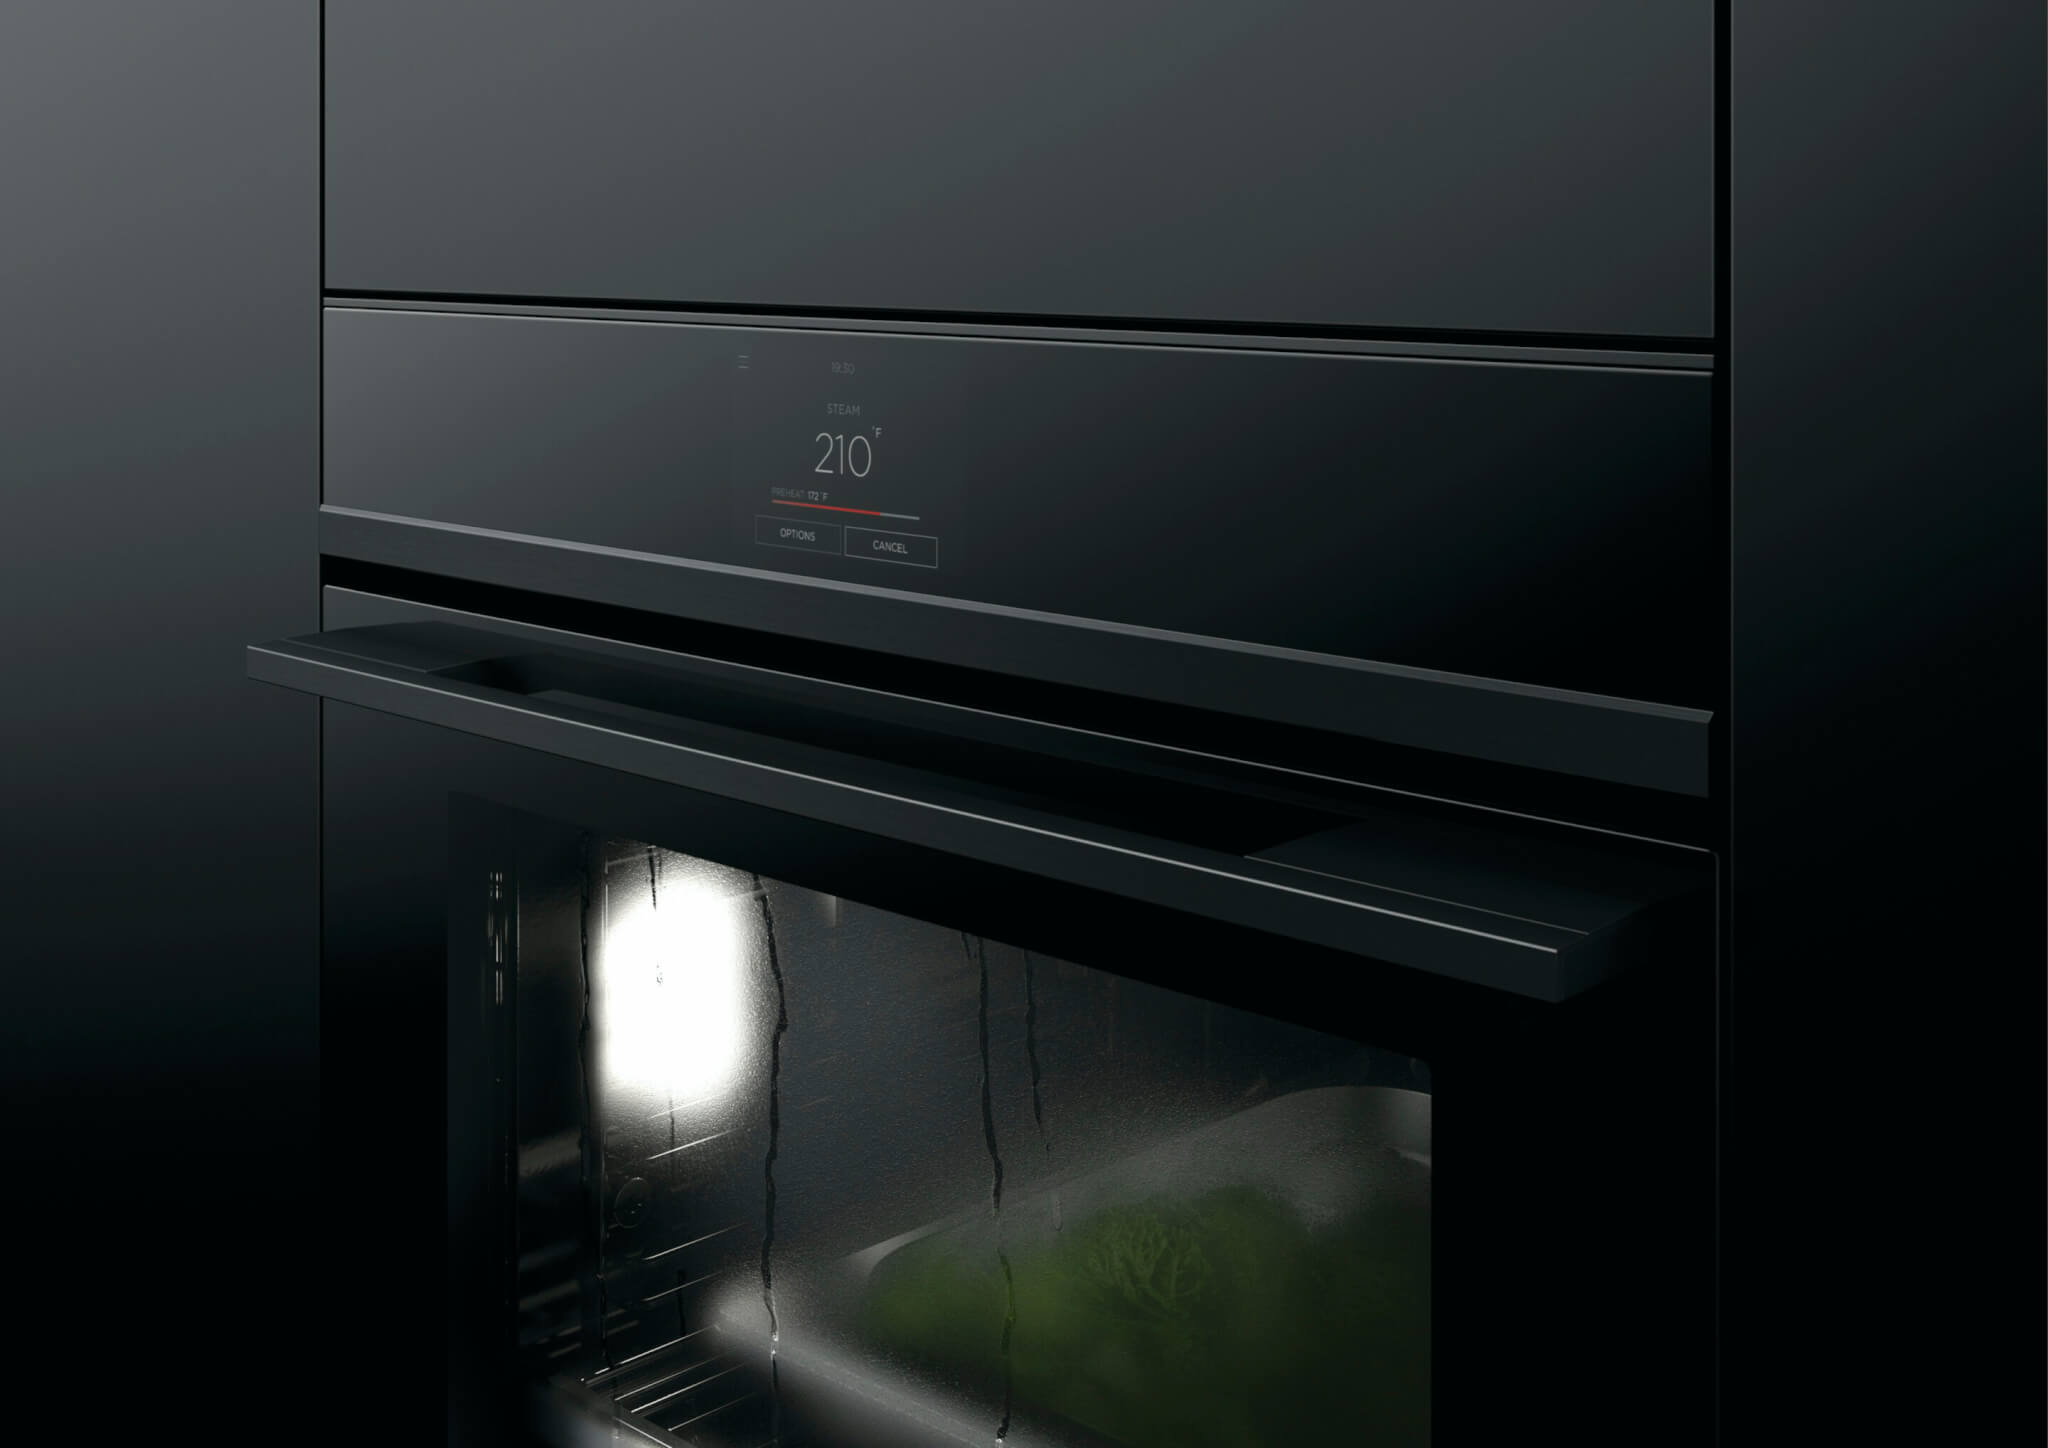 A black oven